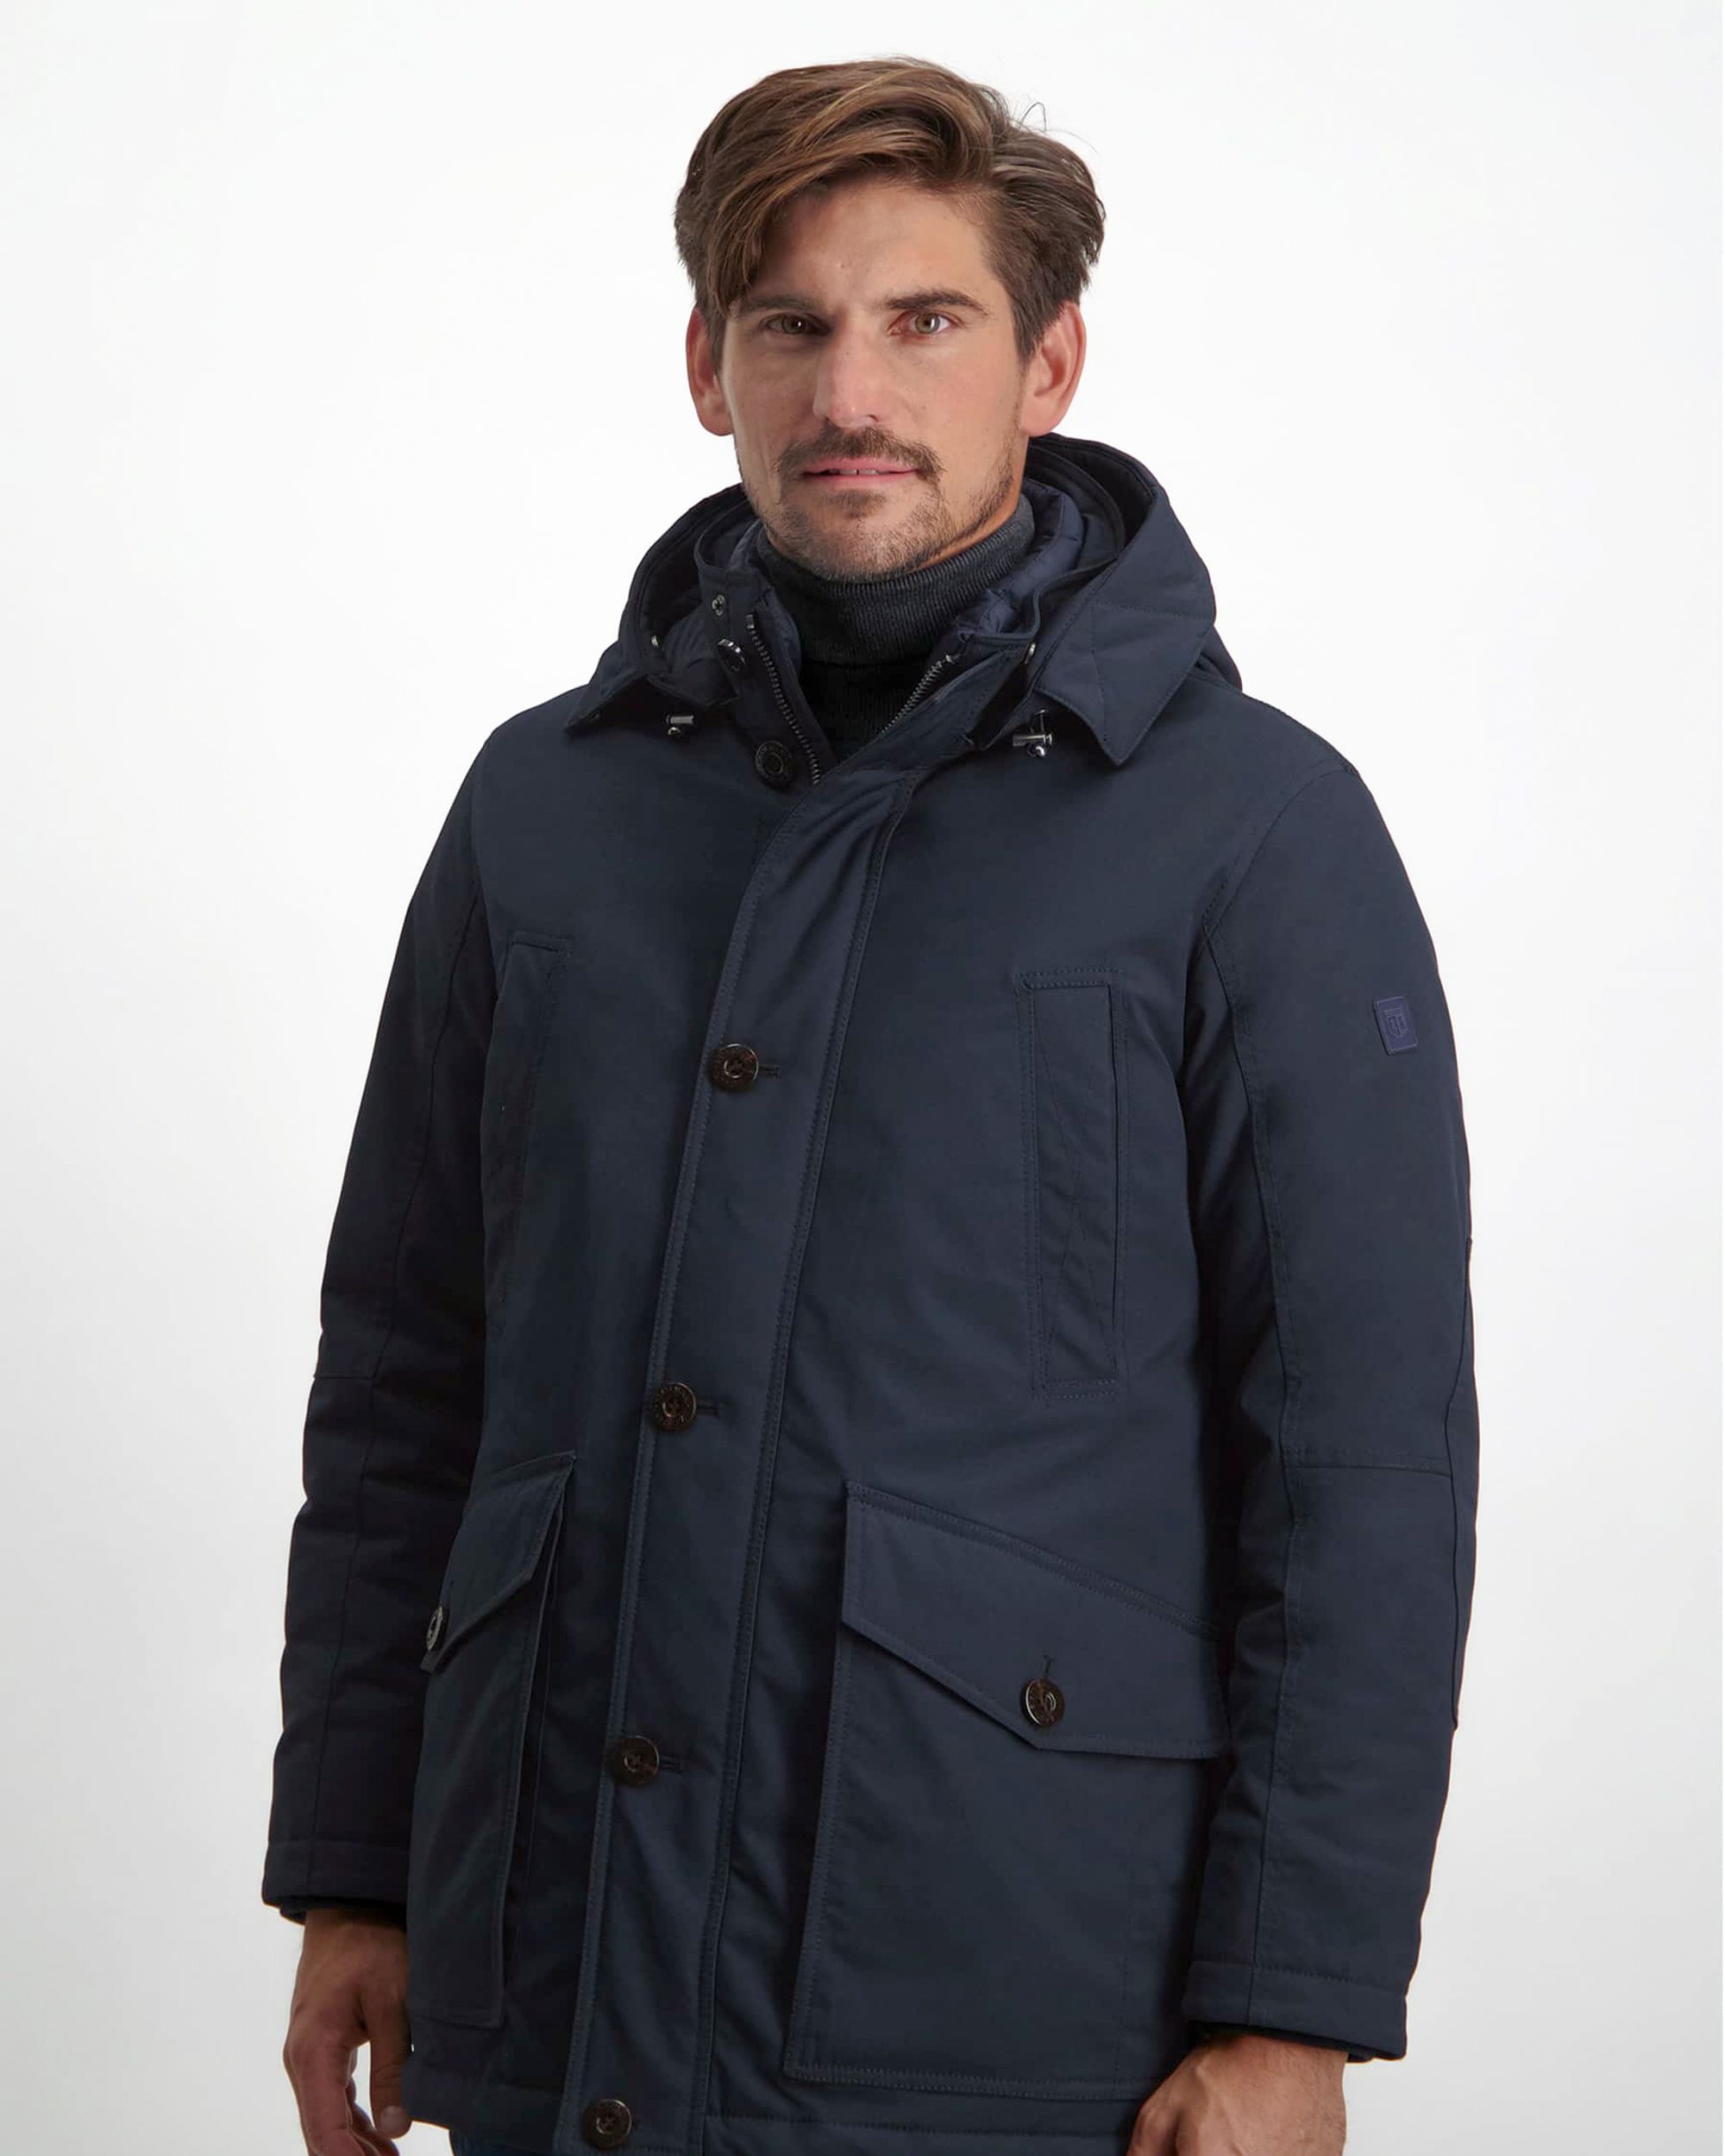 State of Art Parka Donker blauw 081116-001-4XL